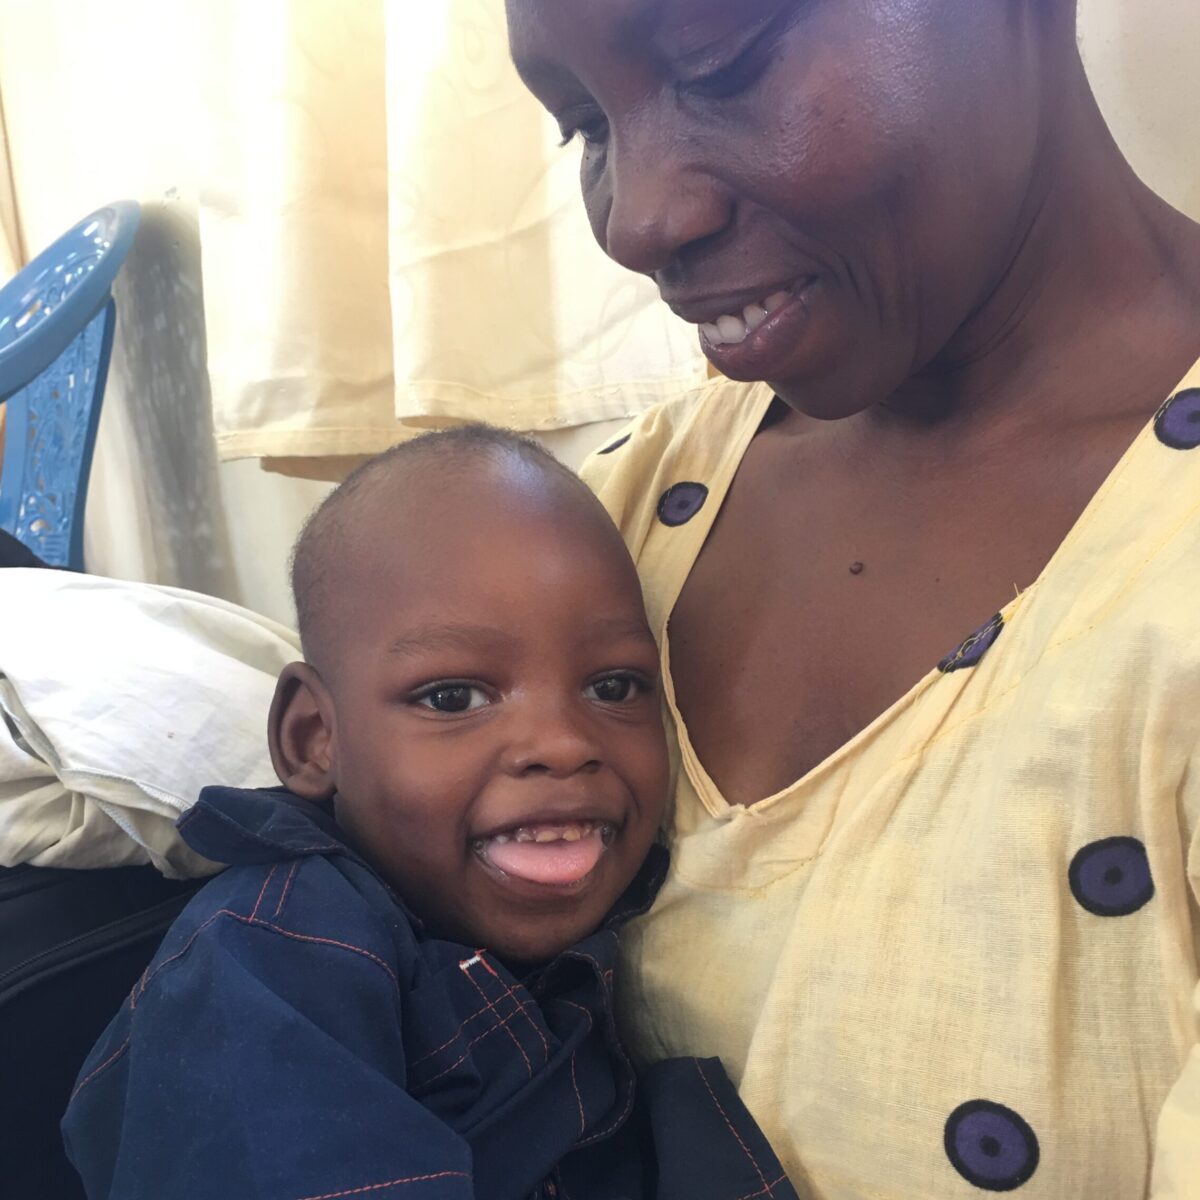 A young child with disabilities in Uganda sits on his mother's lap and both are smiling.